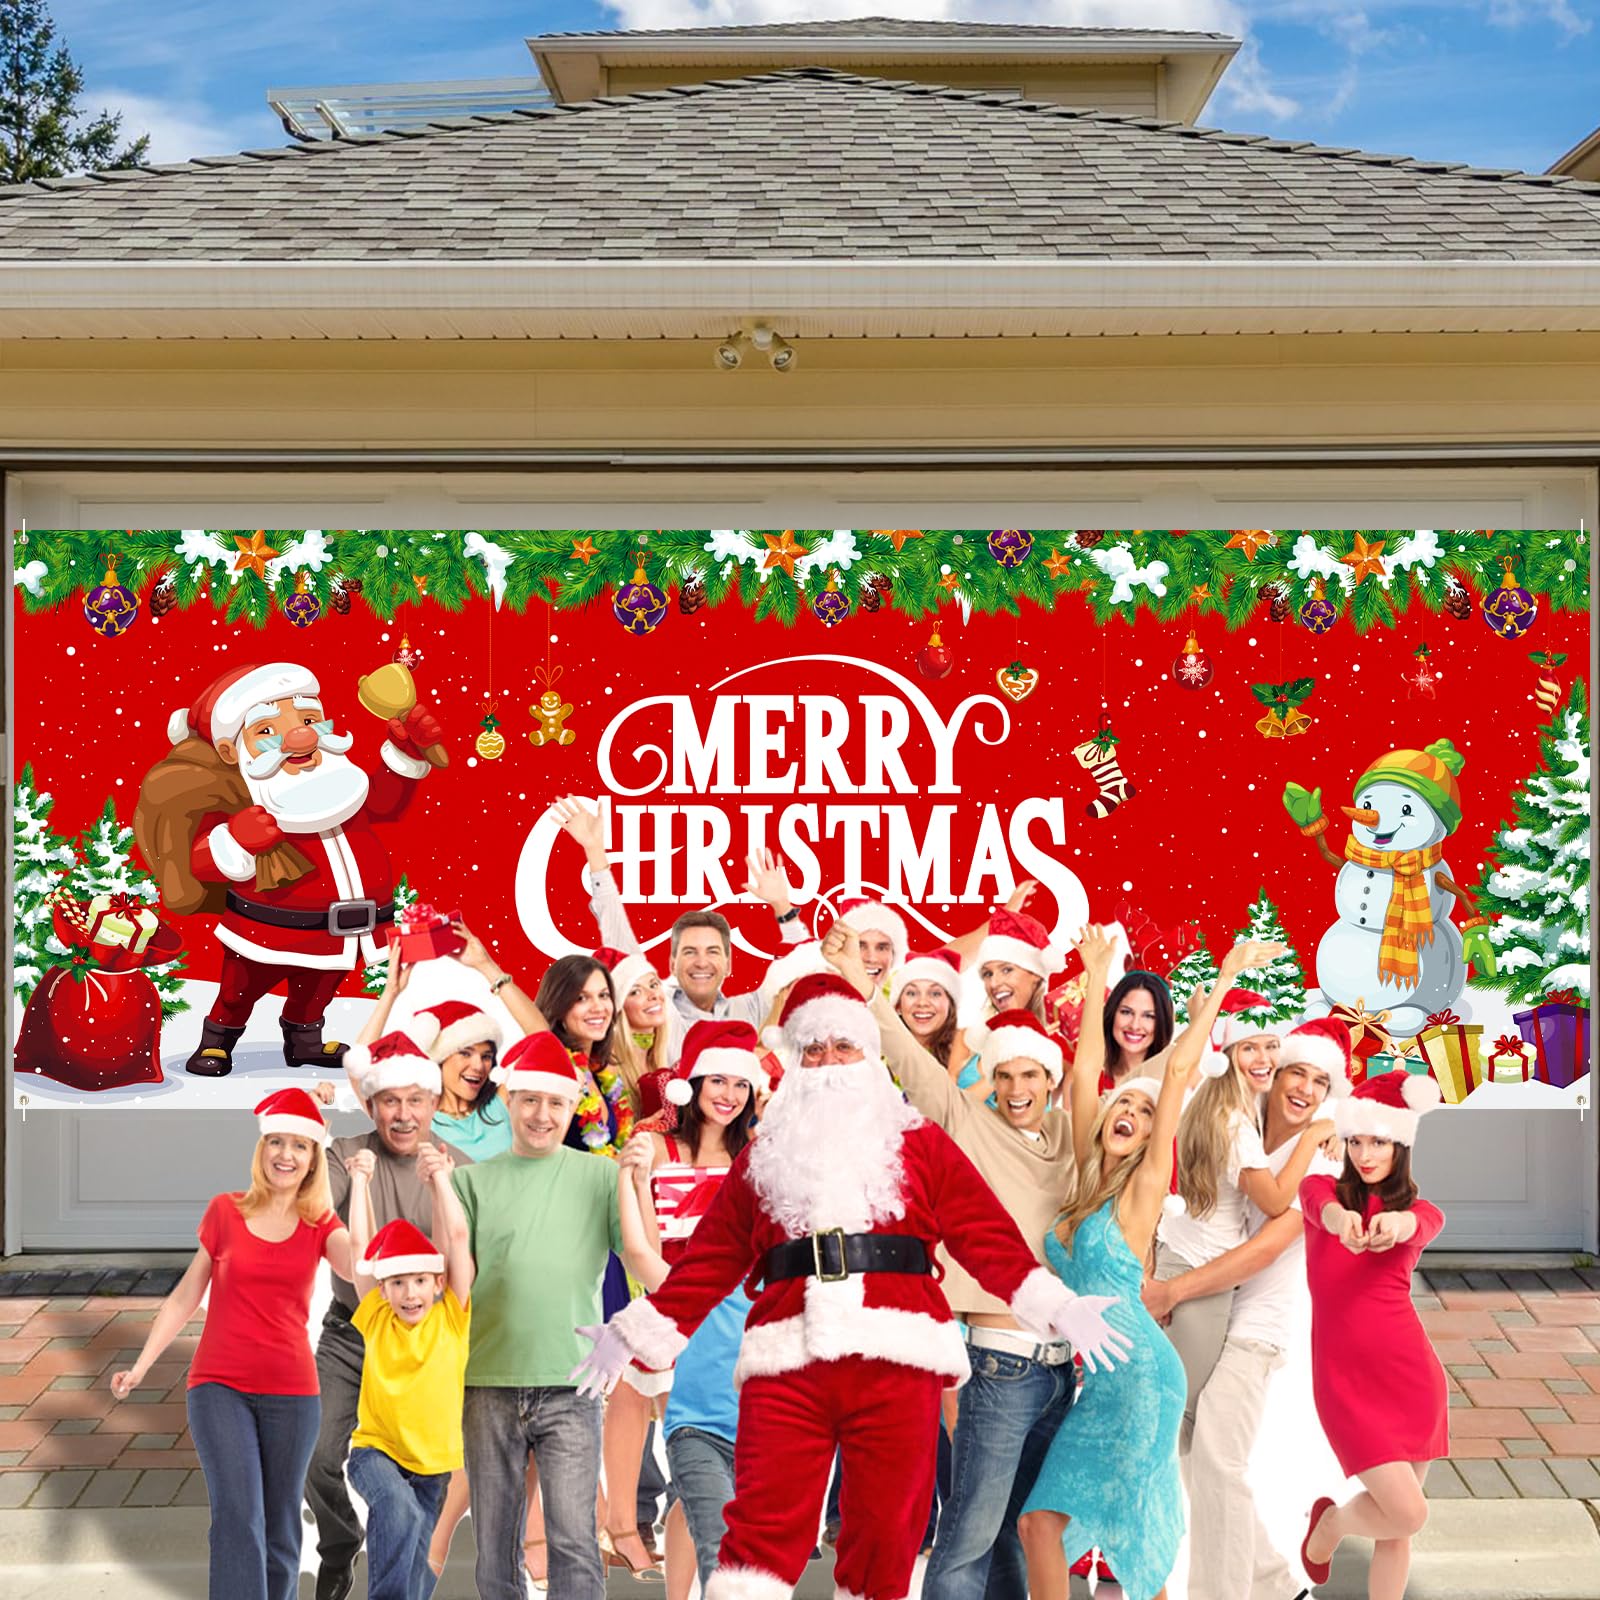 Arosche Extra Large Christmas Garage Door Cover 6 * 16Ft Christmas Garage Door Decorations Xmas Santa Claus Snowman Background Party Supplies for Garage Door Cover, Phoyography, Party Decor